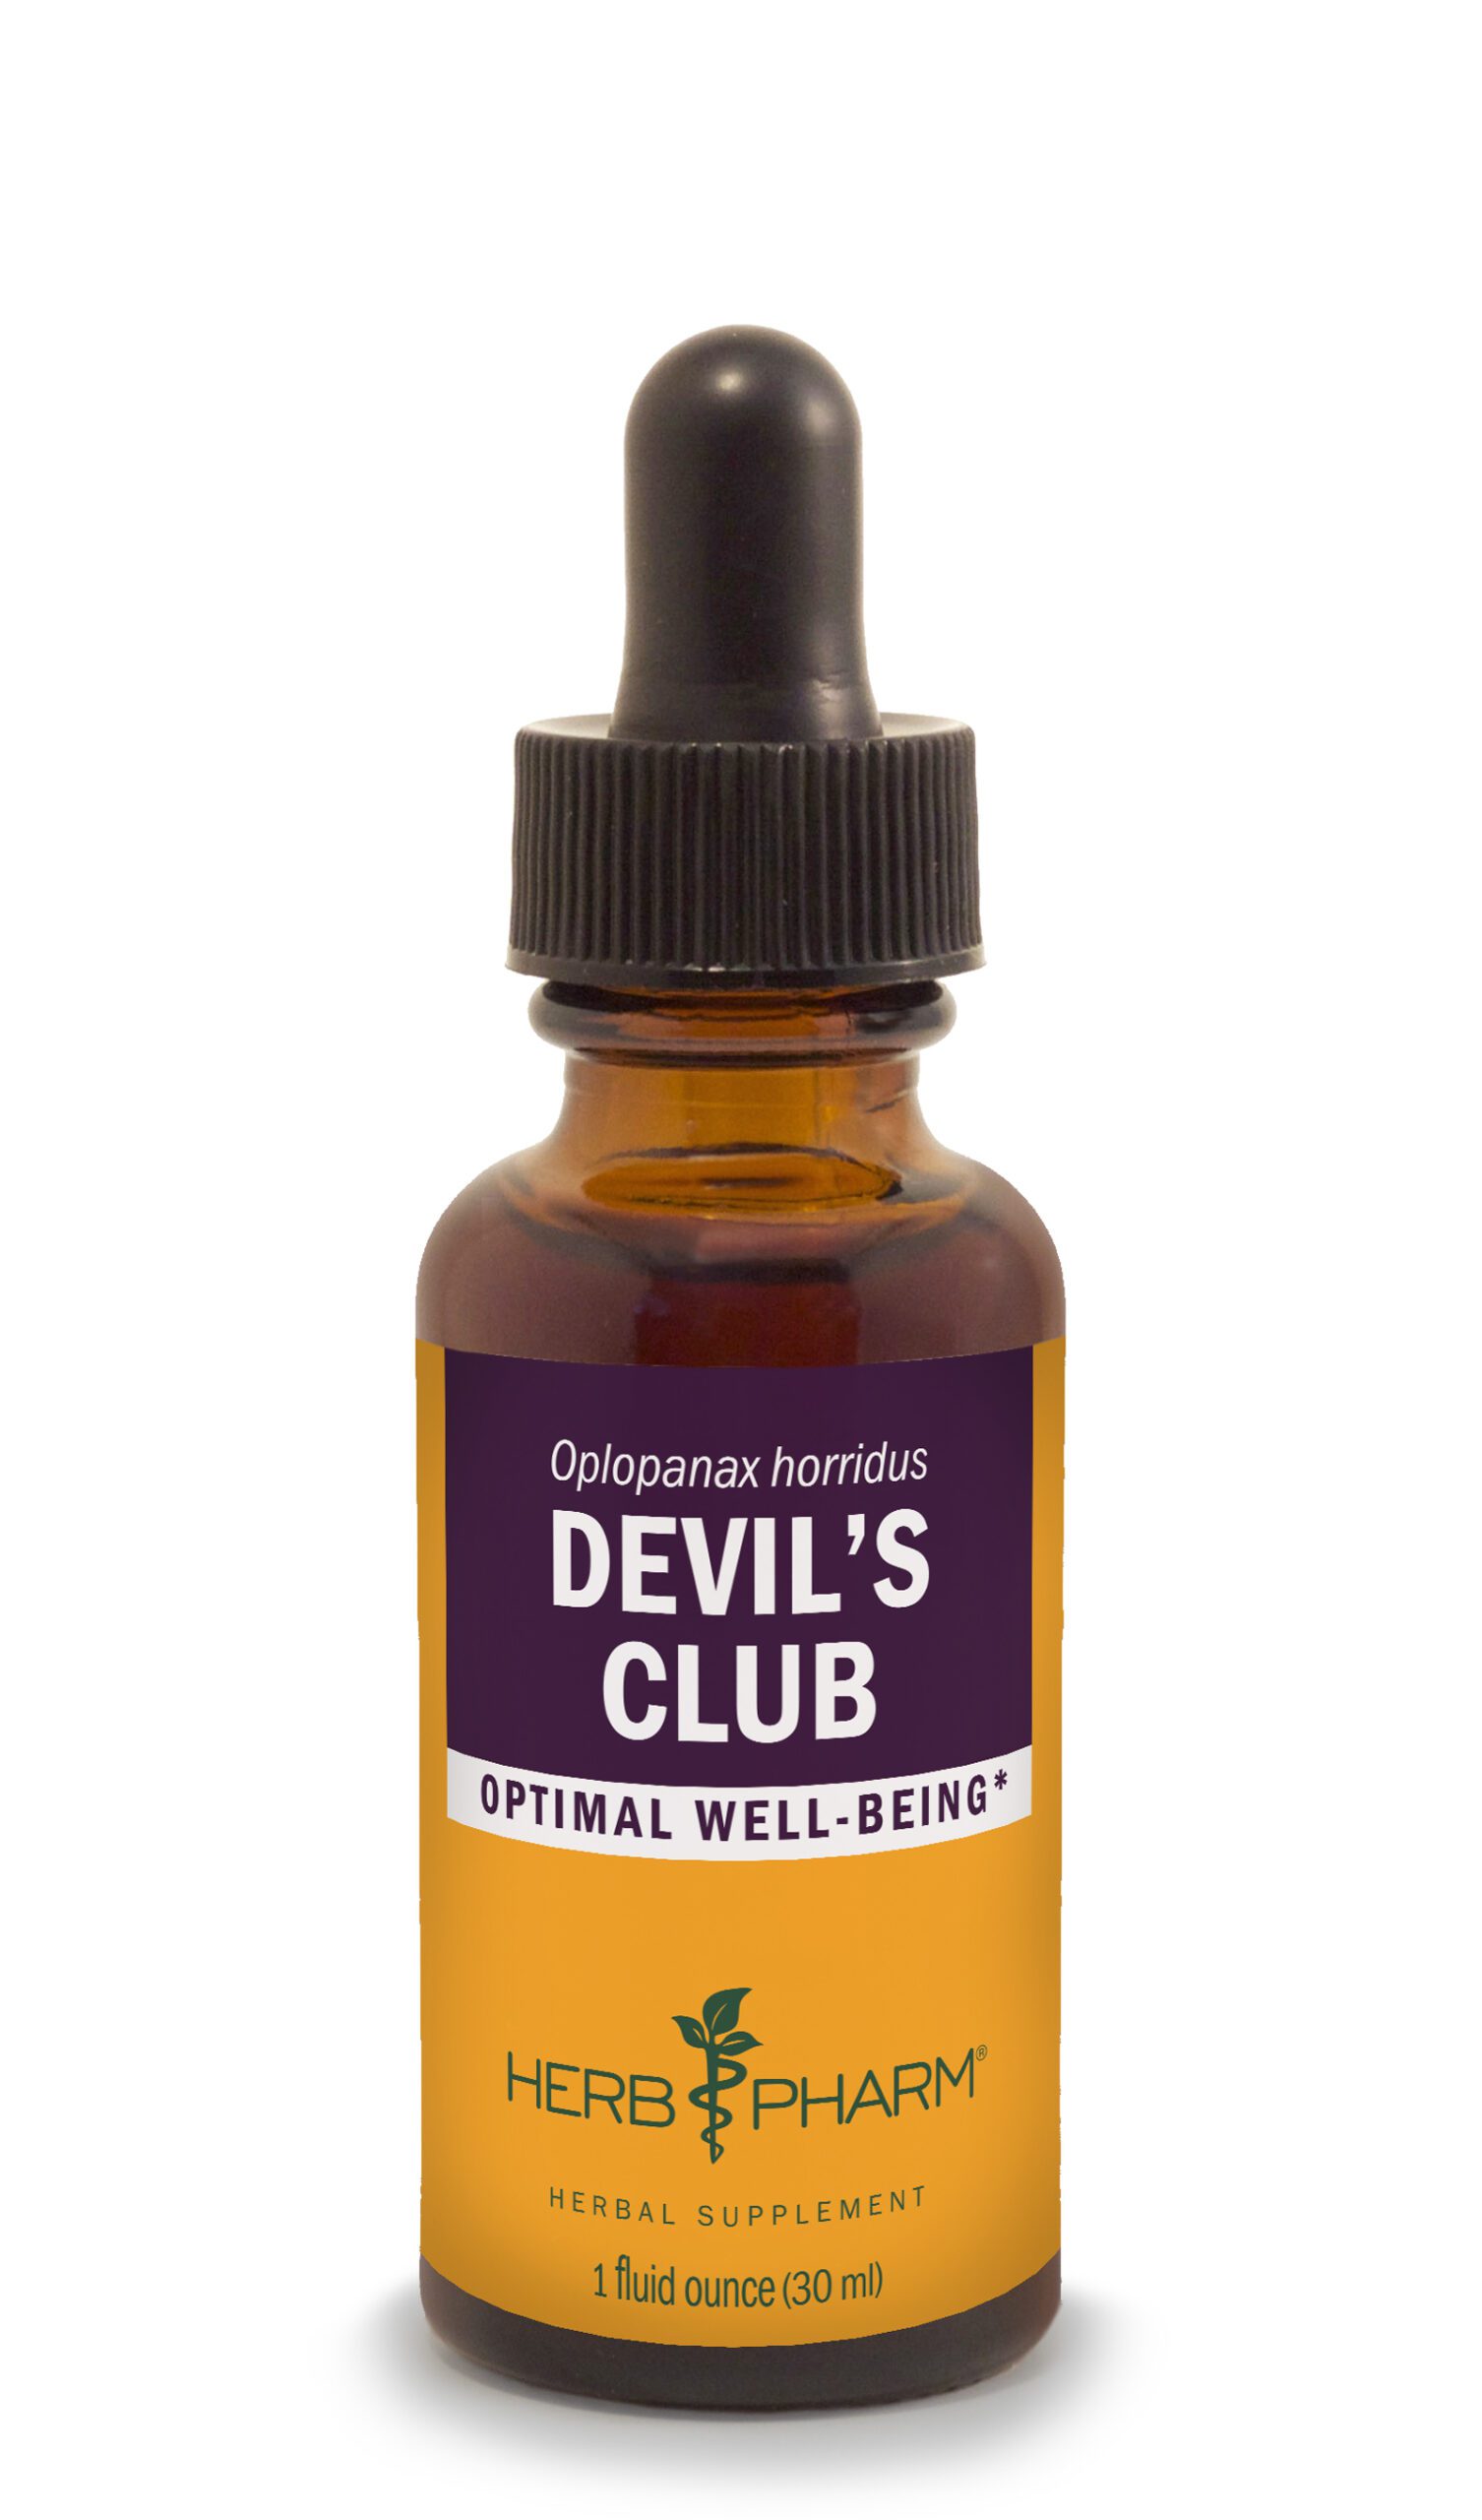 Product Listing Image for Herb Pharm Devils Club Tincture